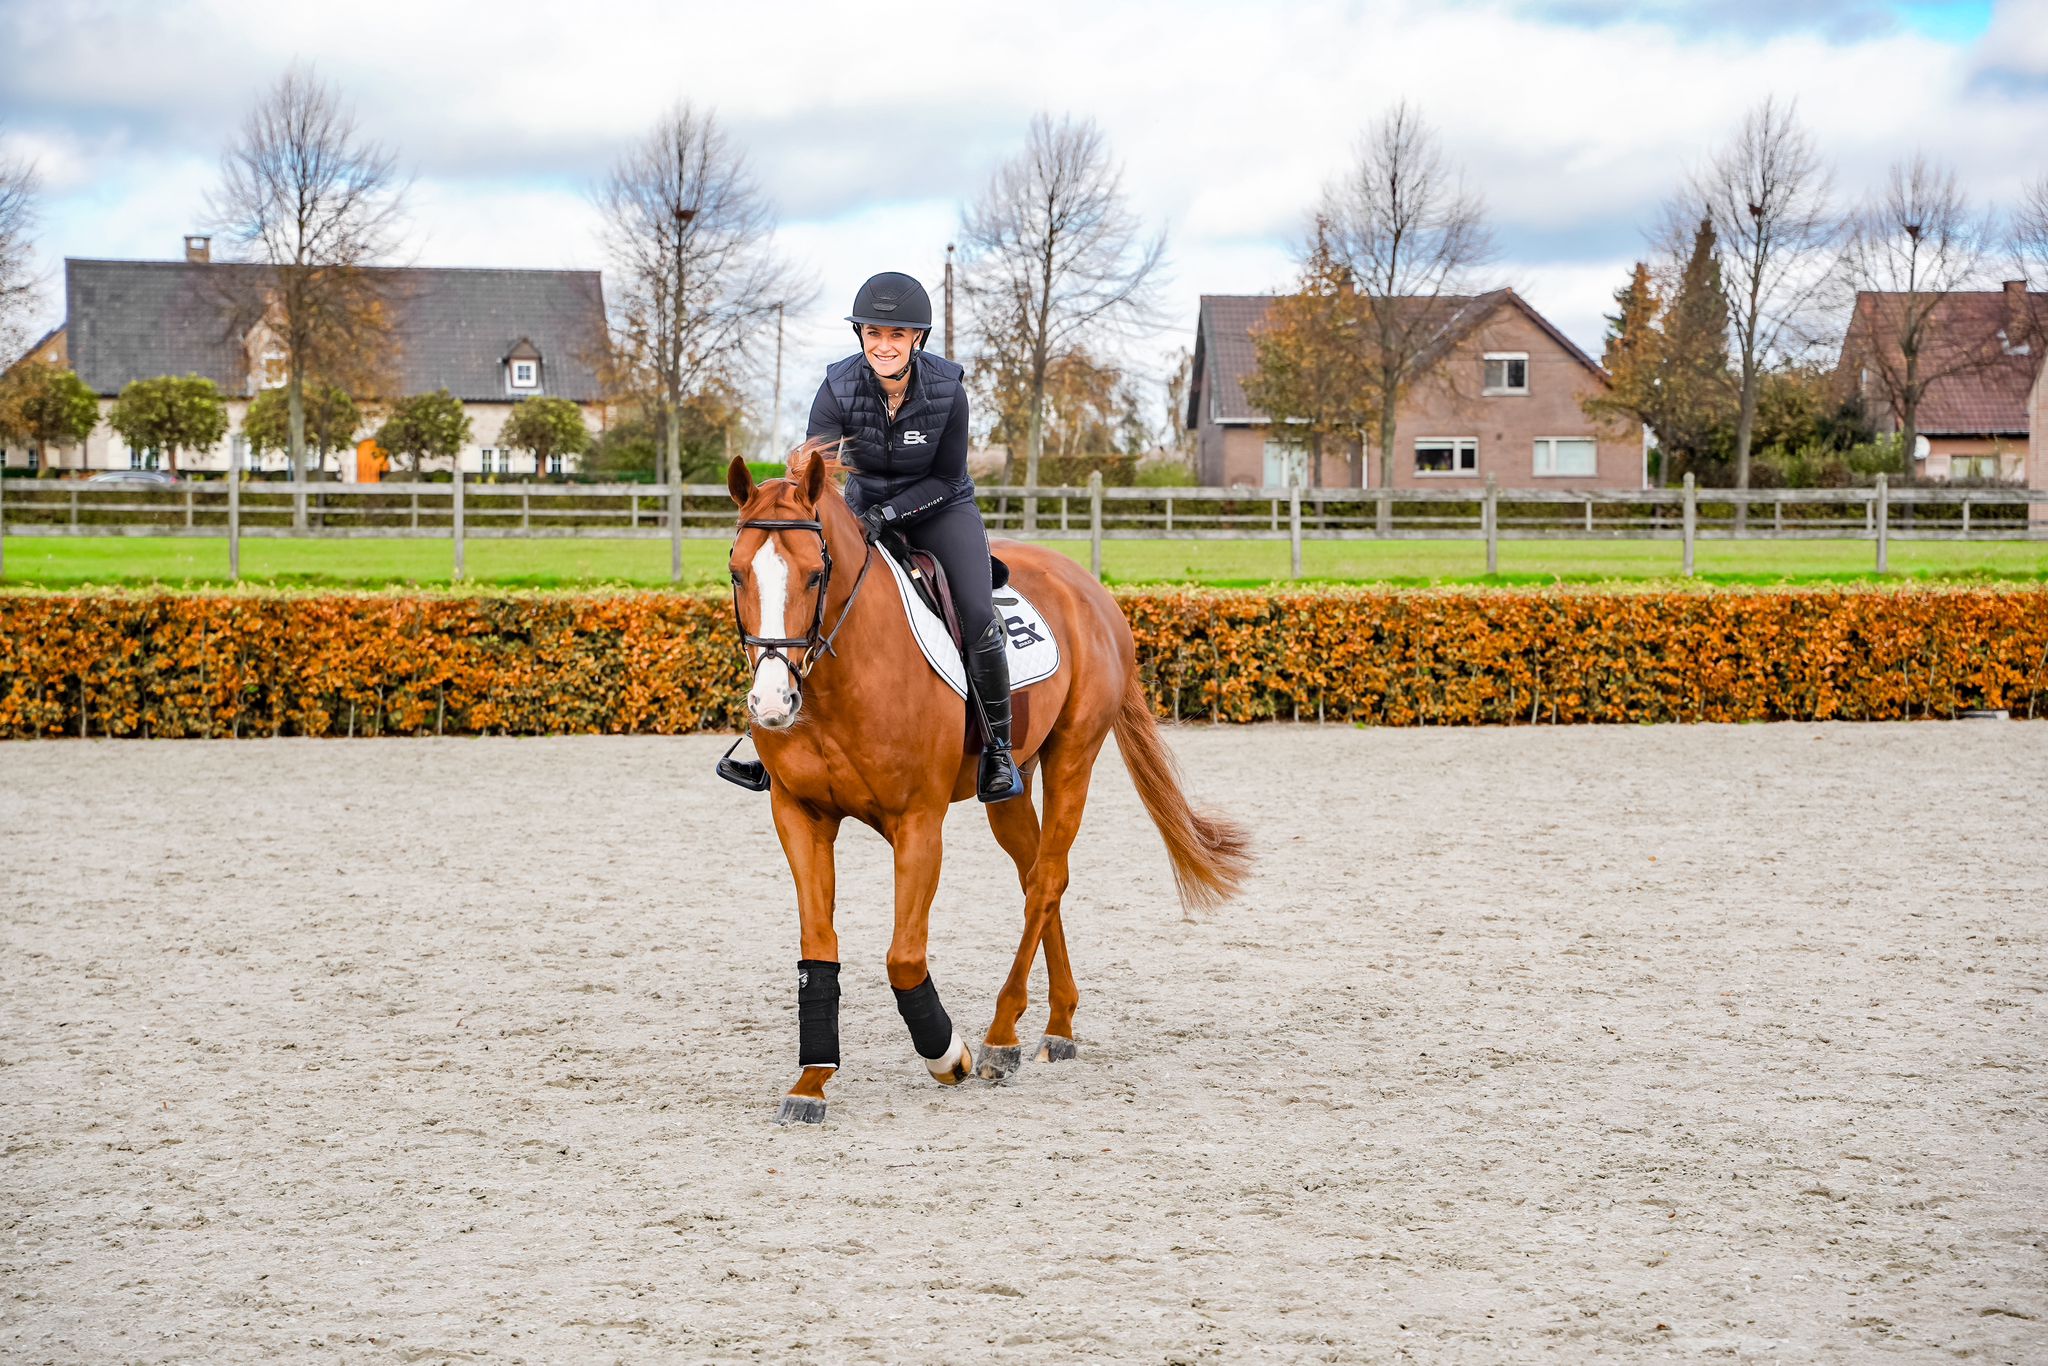 A new chapter unfolds: Frederike Staack joins Stephex Stables: "Horsemanship plays a major role in all success stories"